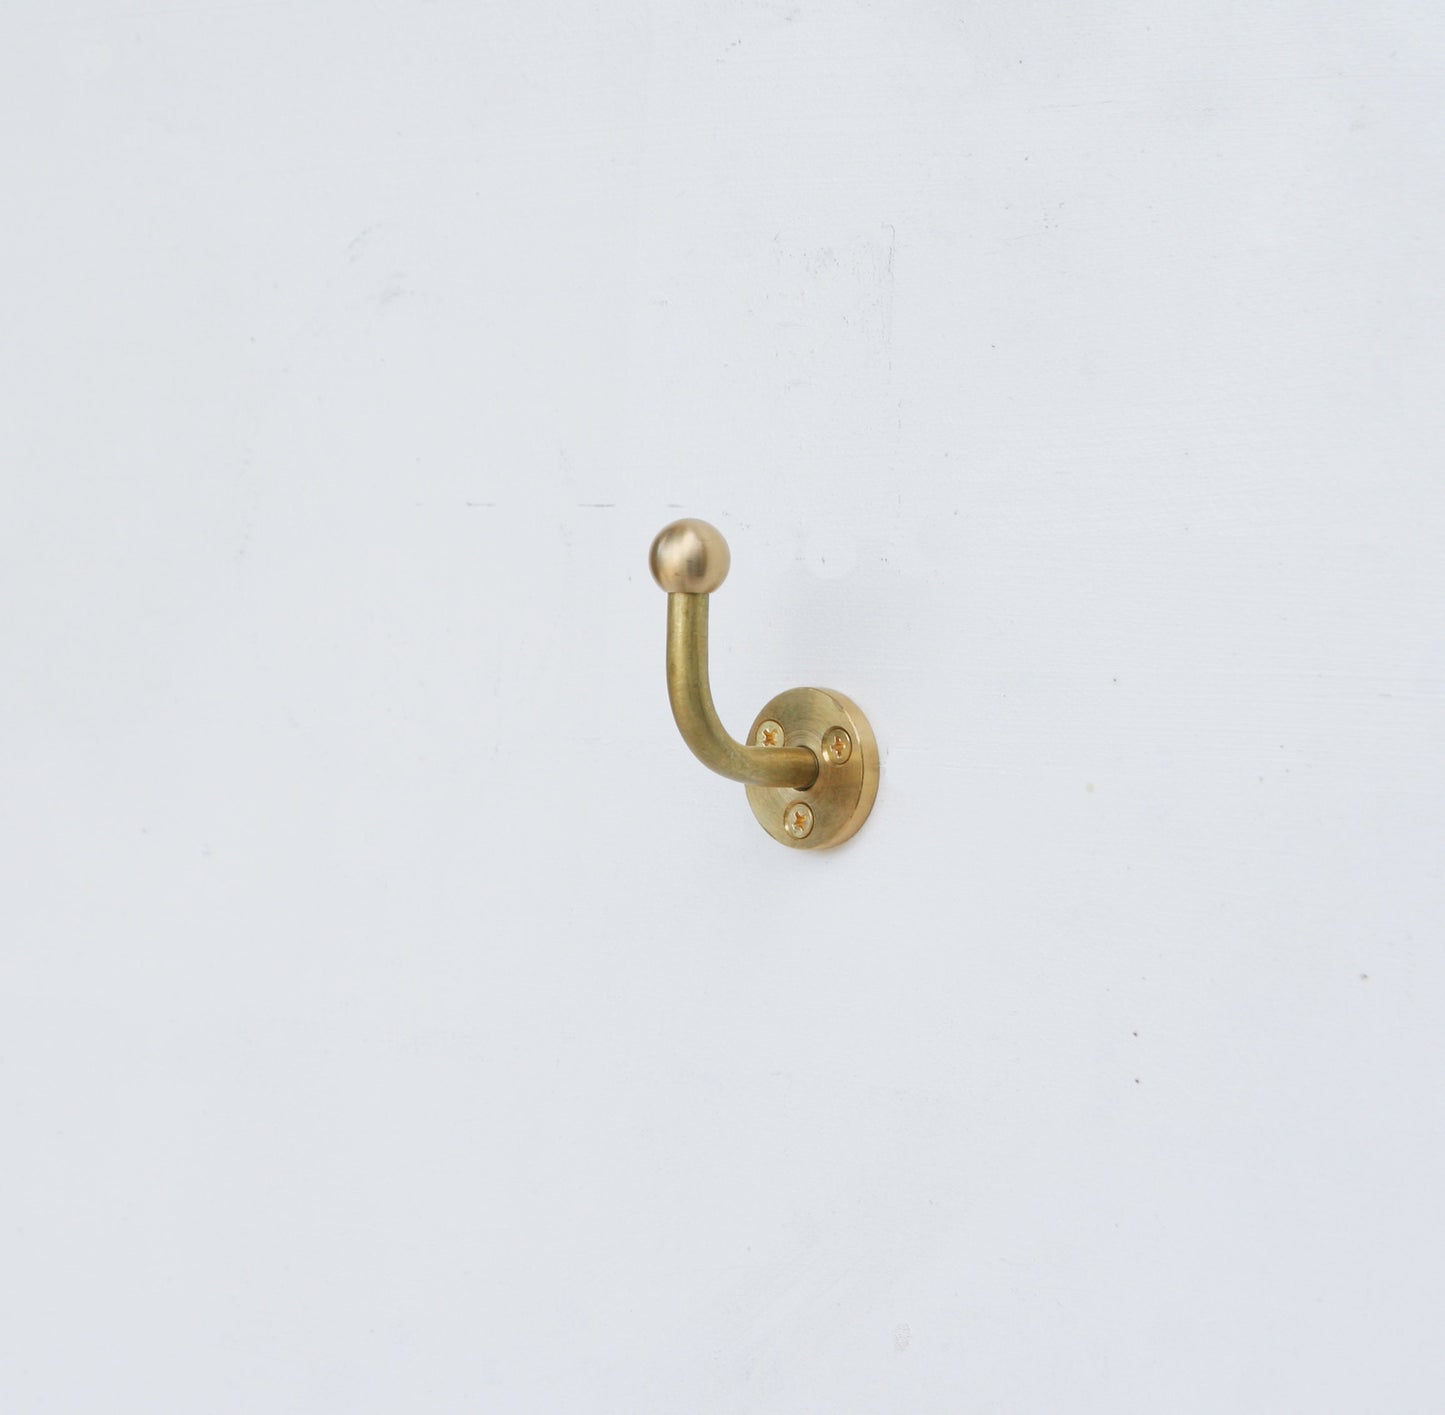 Brass Wall Hooks For The Bathroom And Kitchen -Towel Hook - Robe Hook-Key Hook